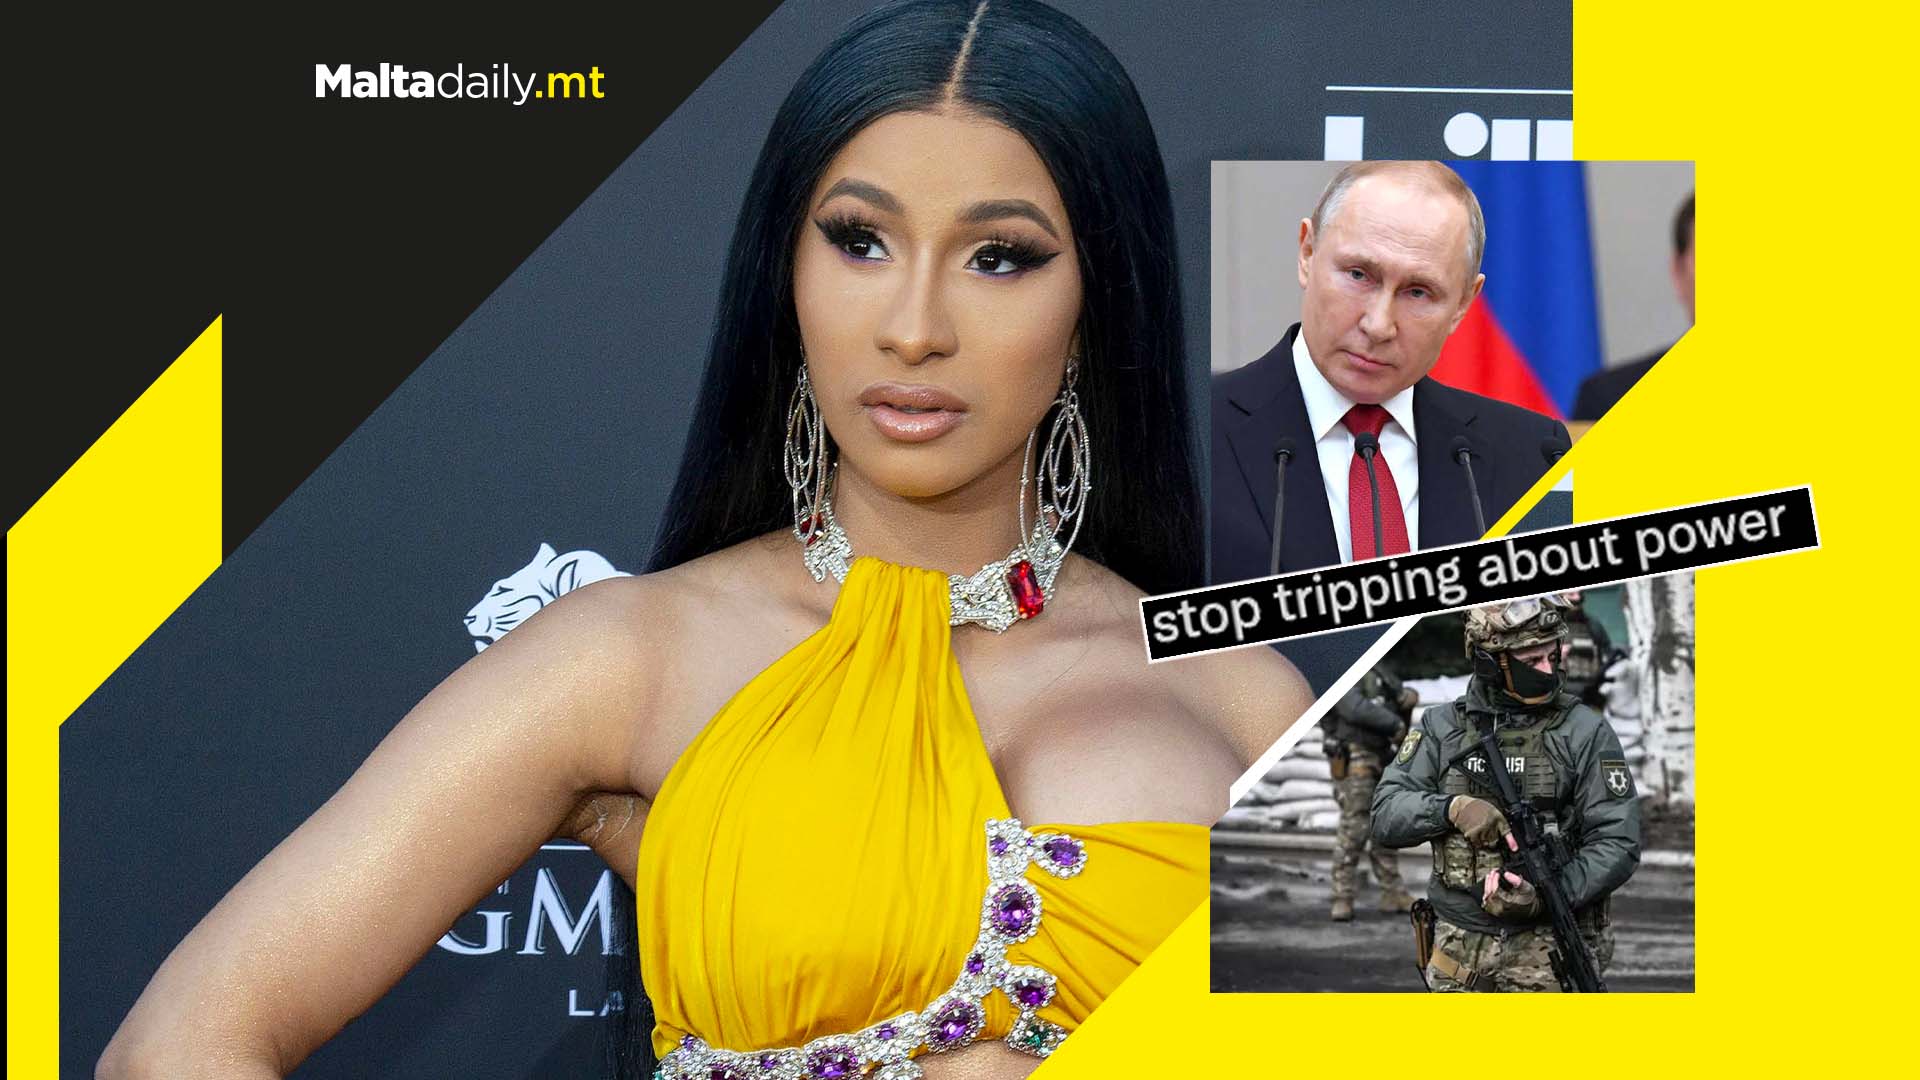 Stop tripping on power - Cardi B speaks about Ukraine crisis